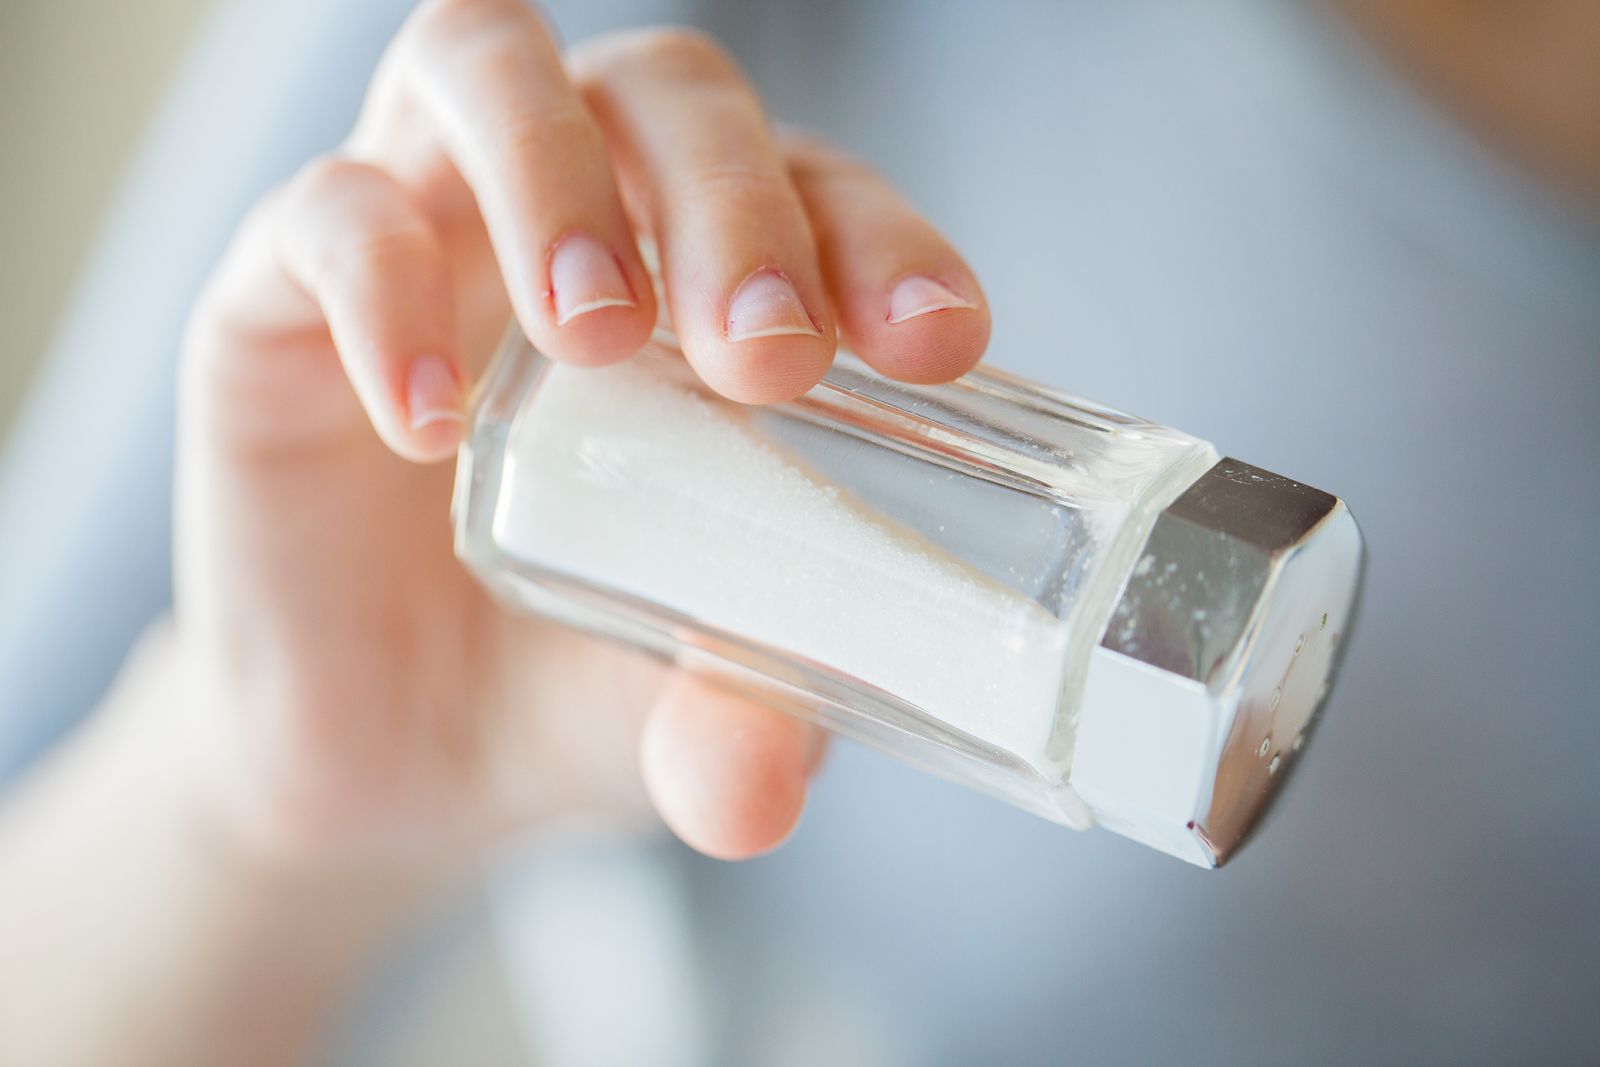 Learn how to reduce salt with these 5 tips - Harvard Health